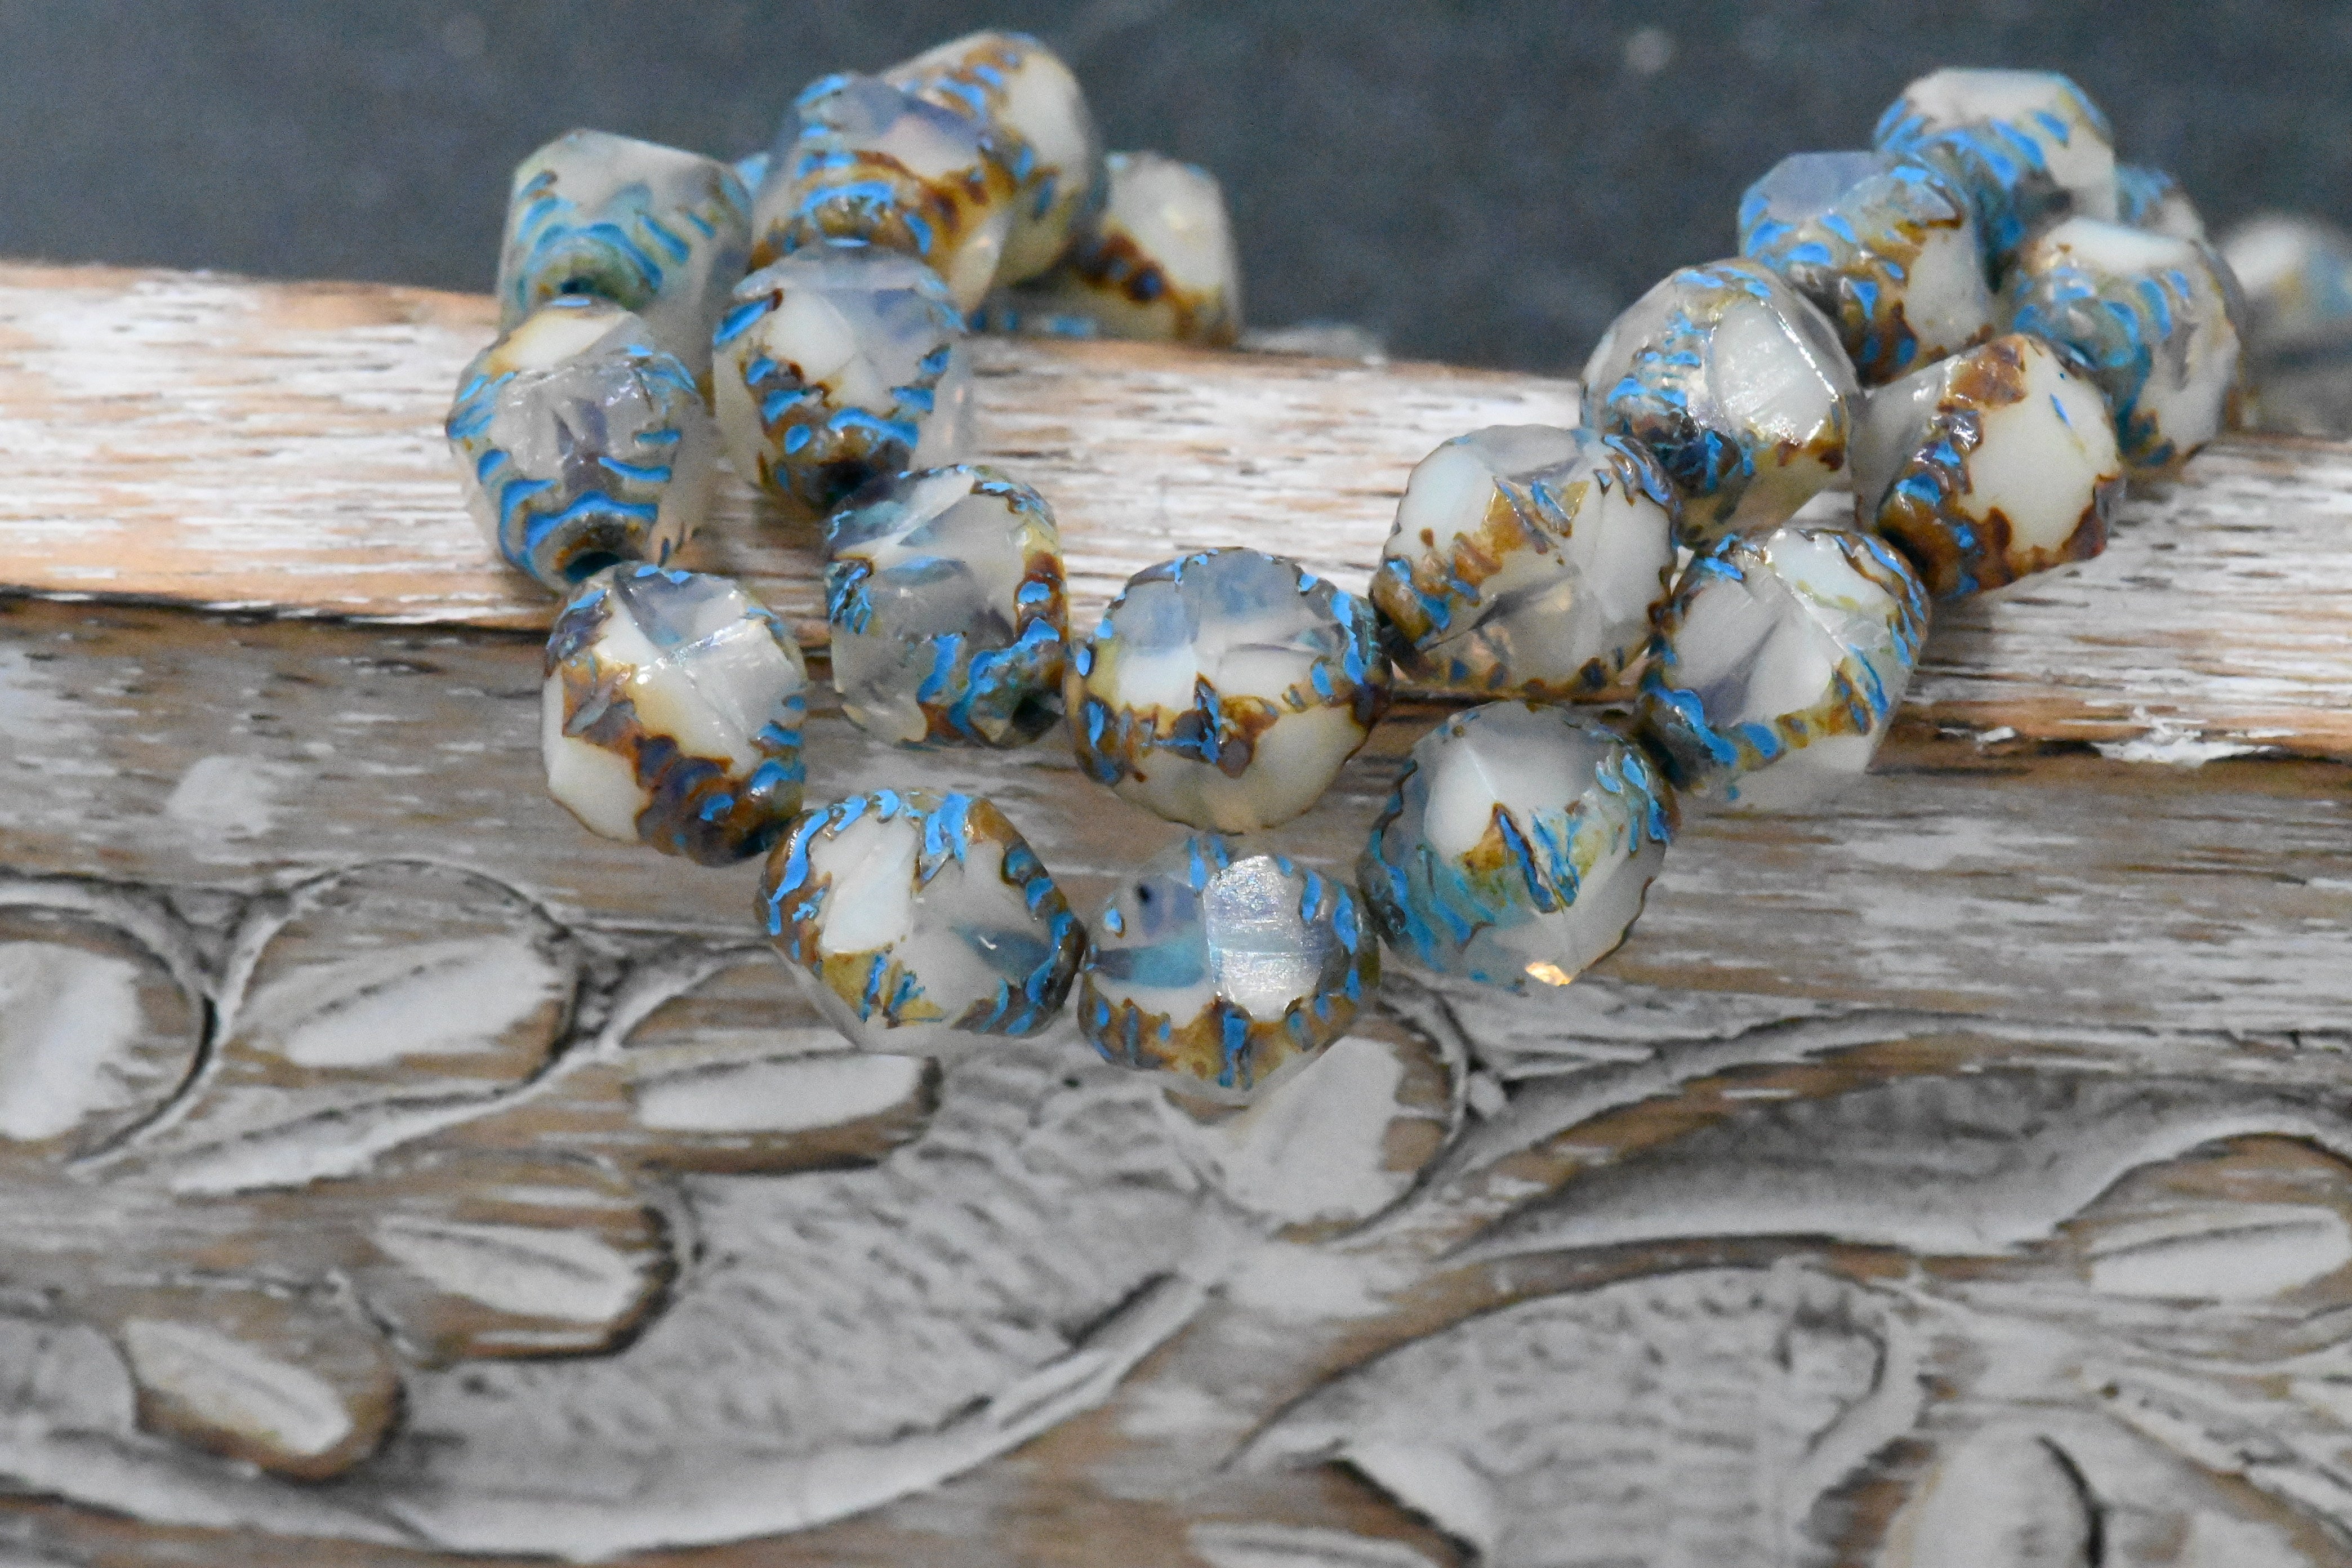 15pc Faceted Bicone White with a Picasso Finish and Turquoise Wash 8x10mm Czech Glass Beads